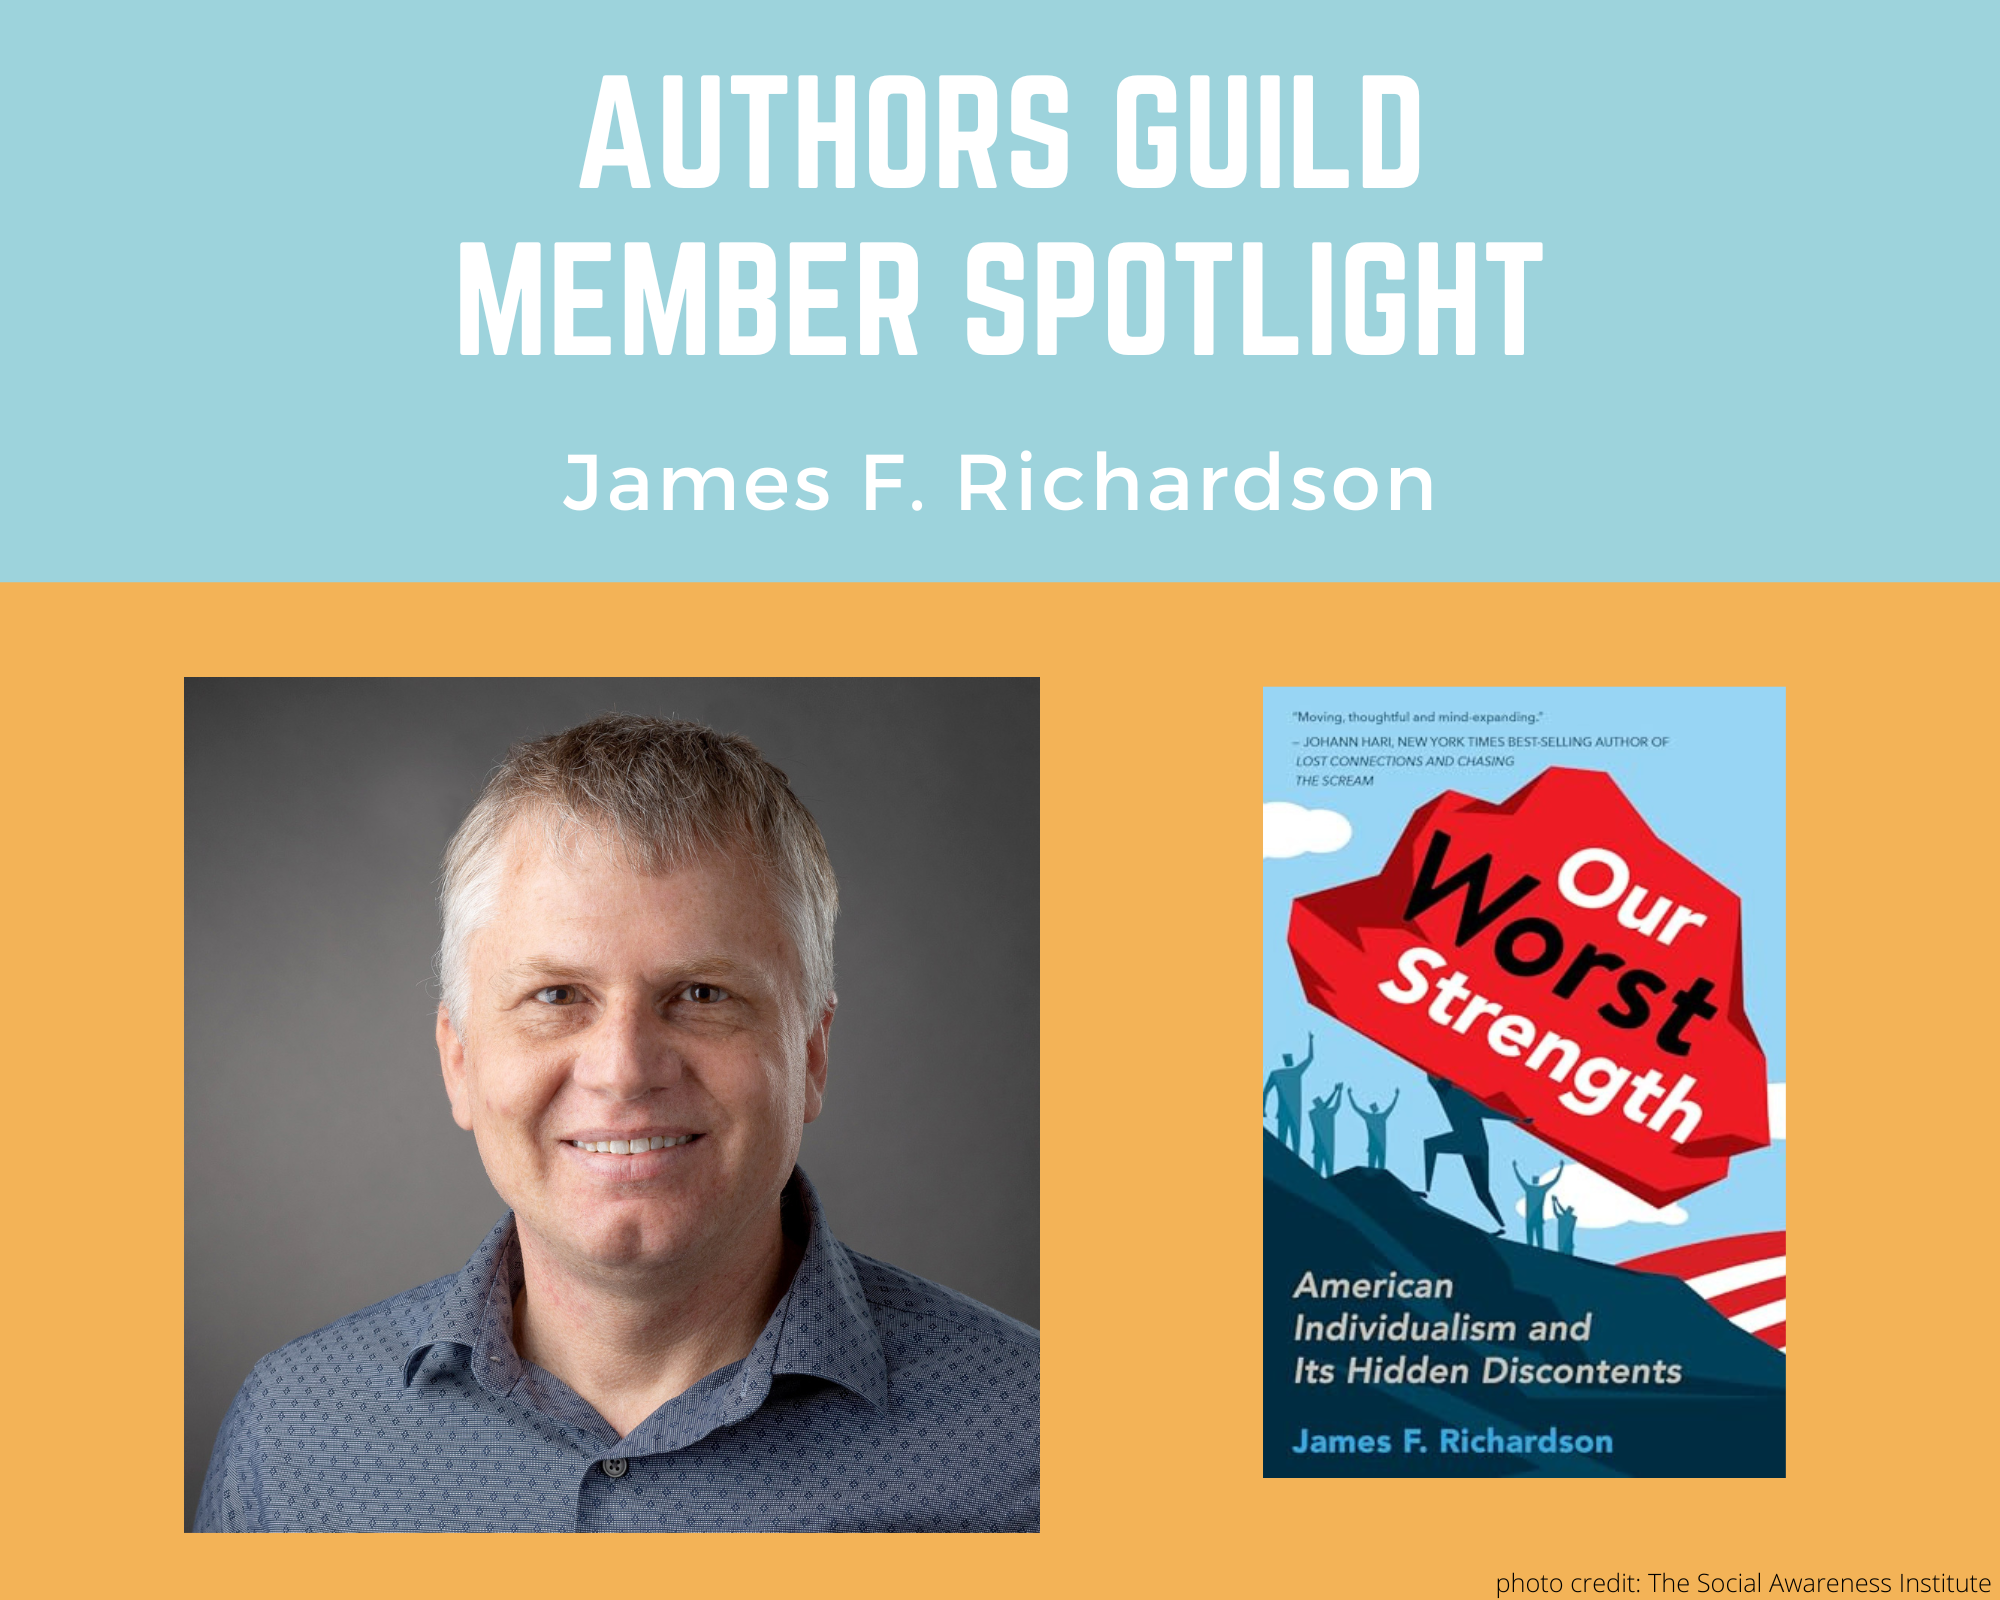 author James F. Richardson and his book Our Worst Strength